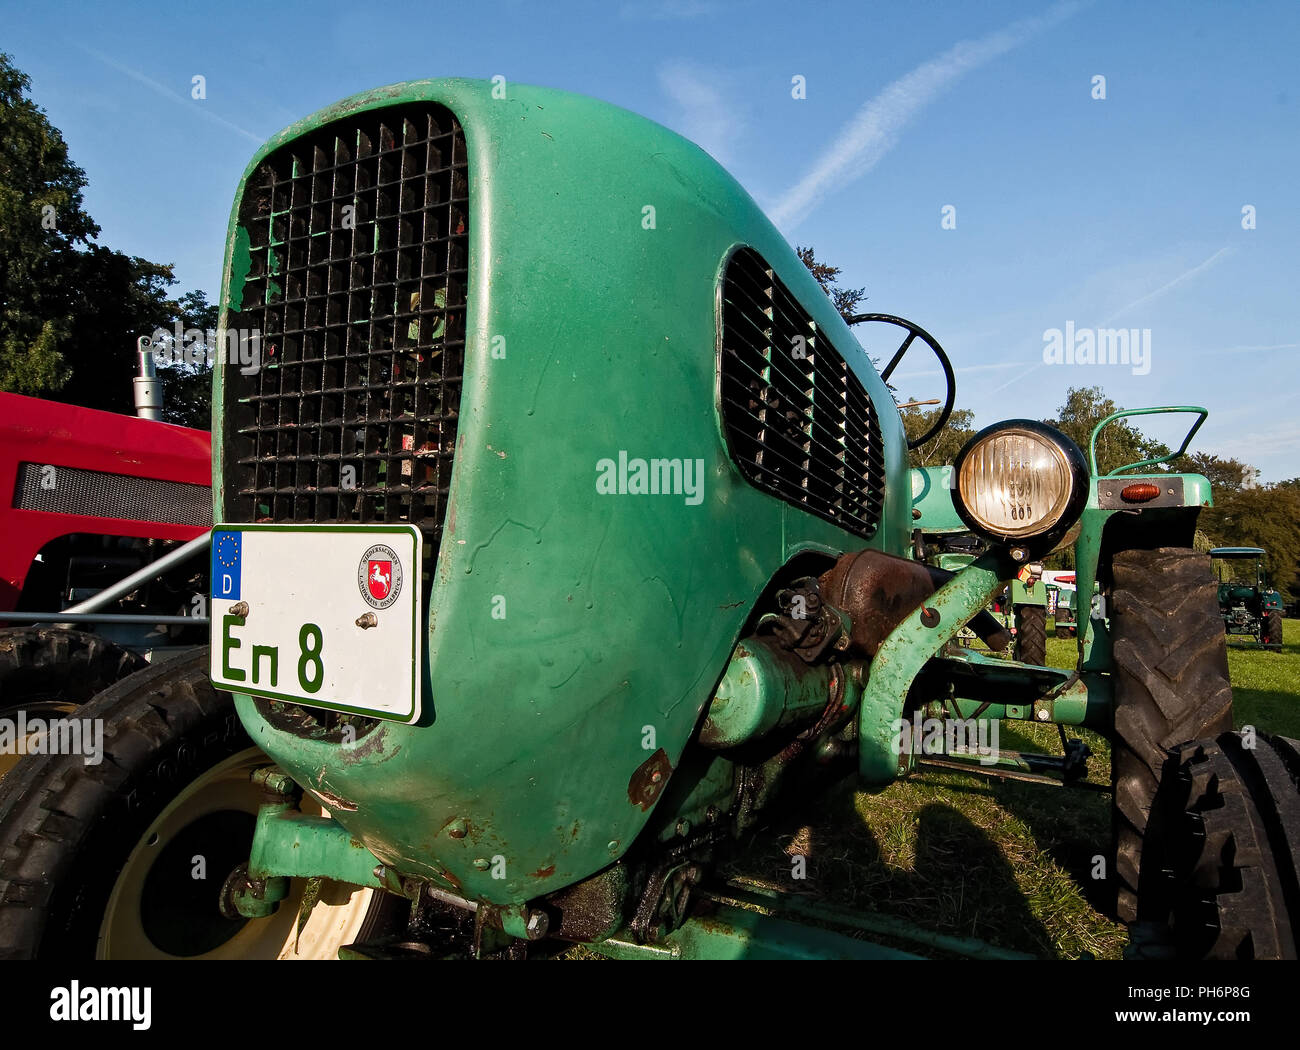 Agricultural machinery exhibition vintage tractor Stock Photo